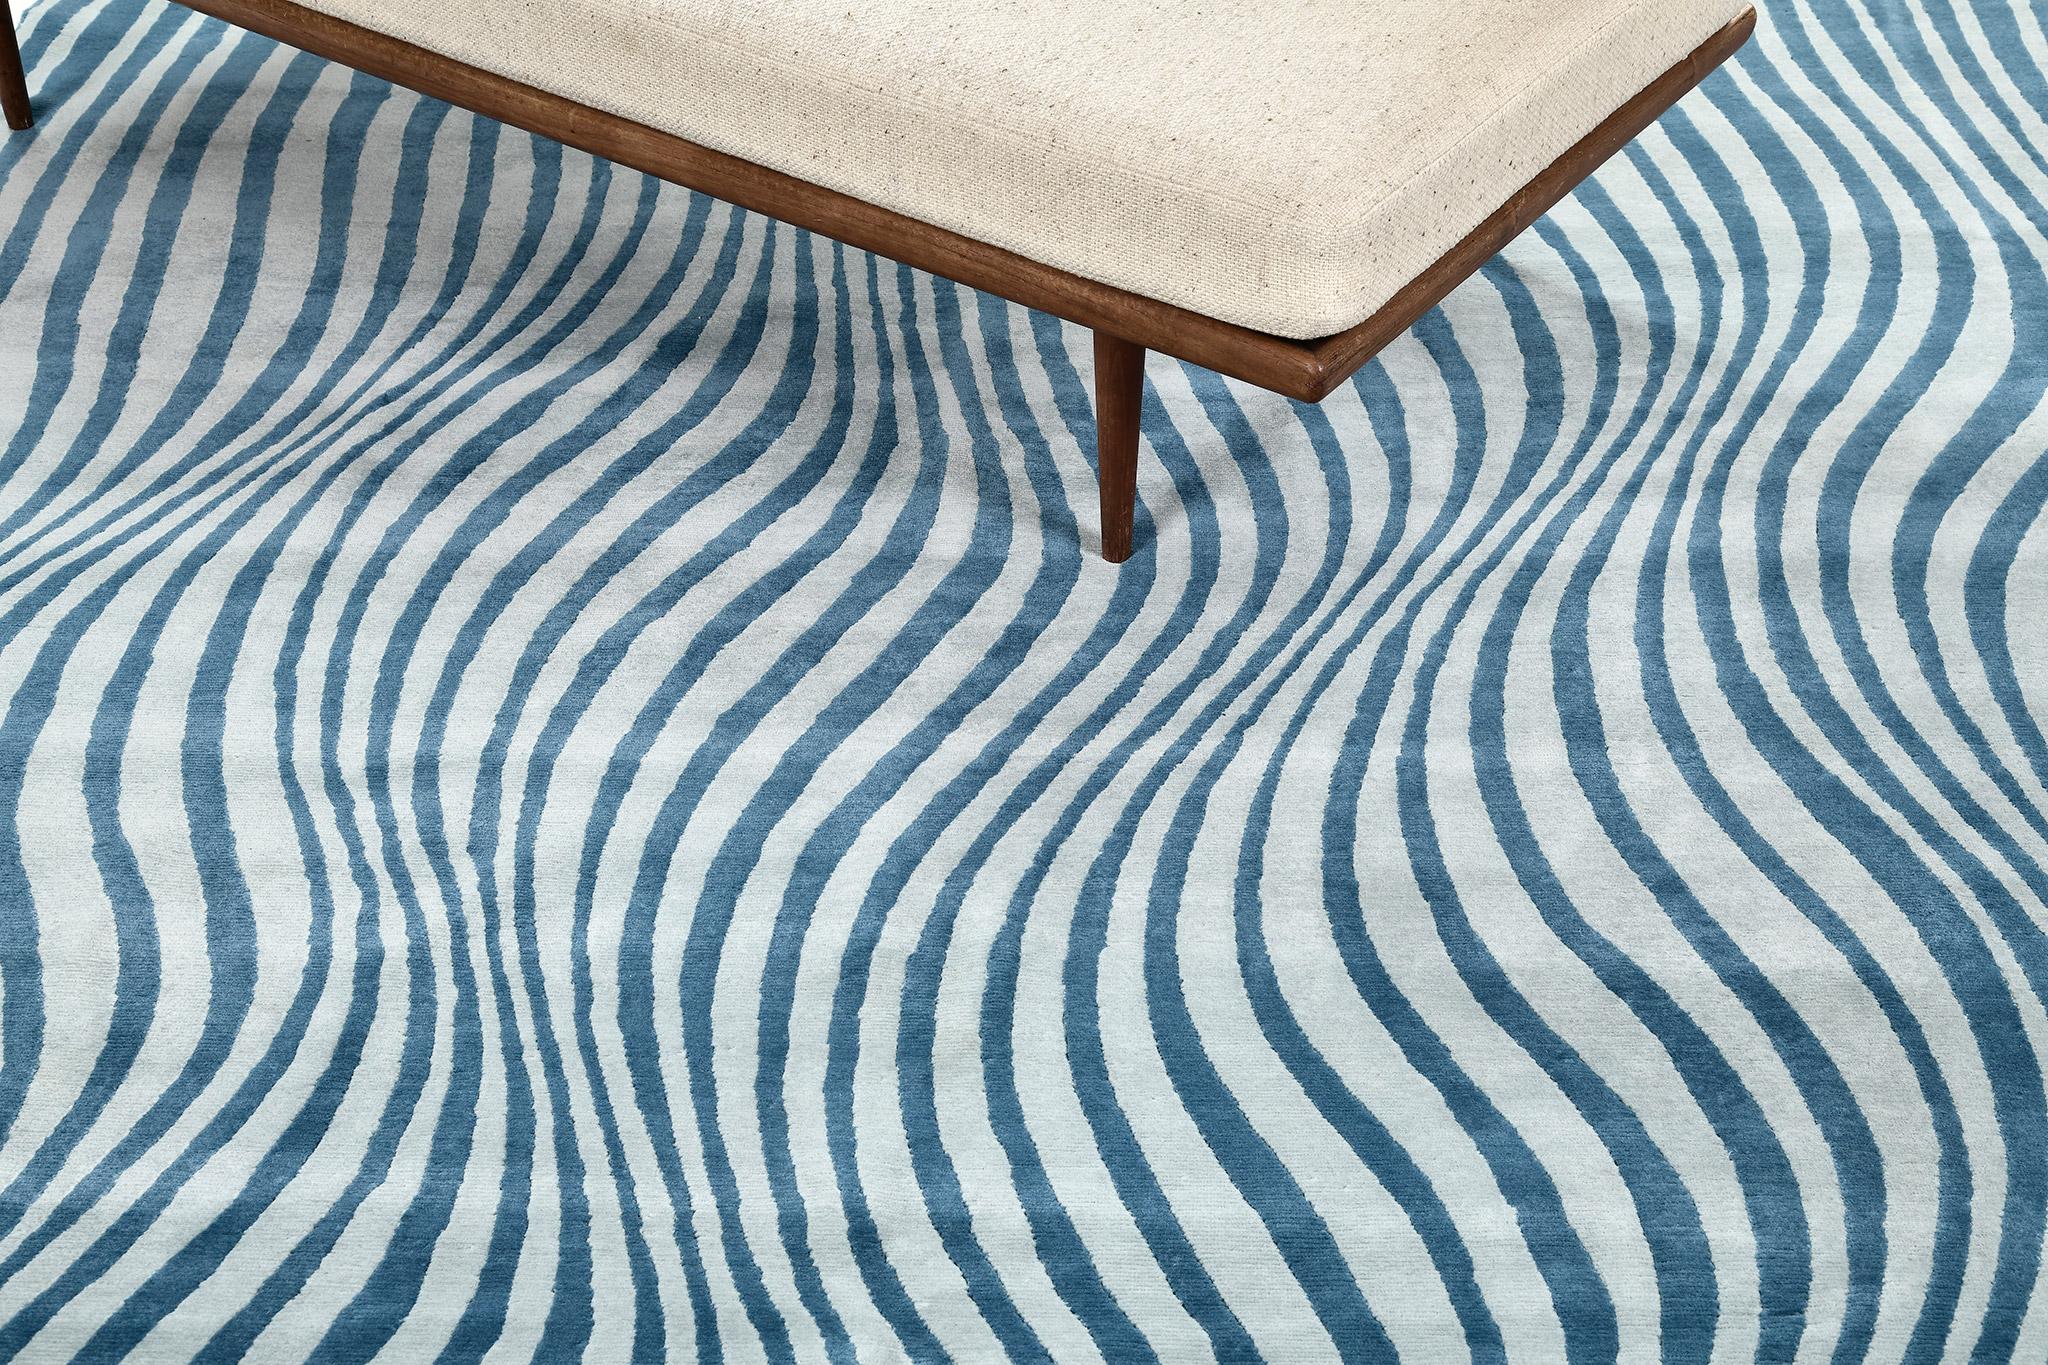 A modern design rug that gives your space a bold and distinctive edge. Featuring the ripple effect that gives the viewer a sight of illusion upon seeing this fantastic rug. Whimsical yet enticing, this rug will add a sense of personality as a